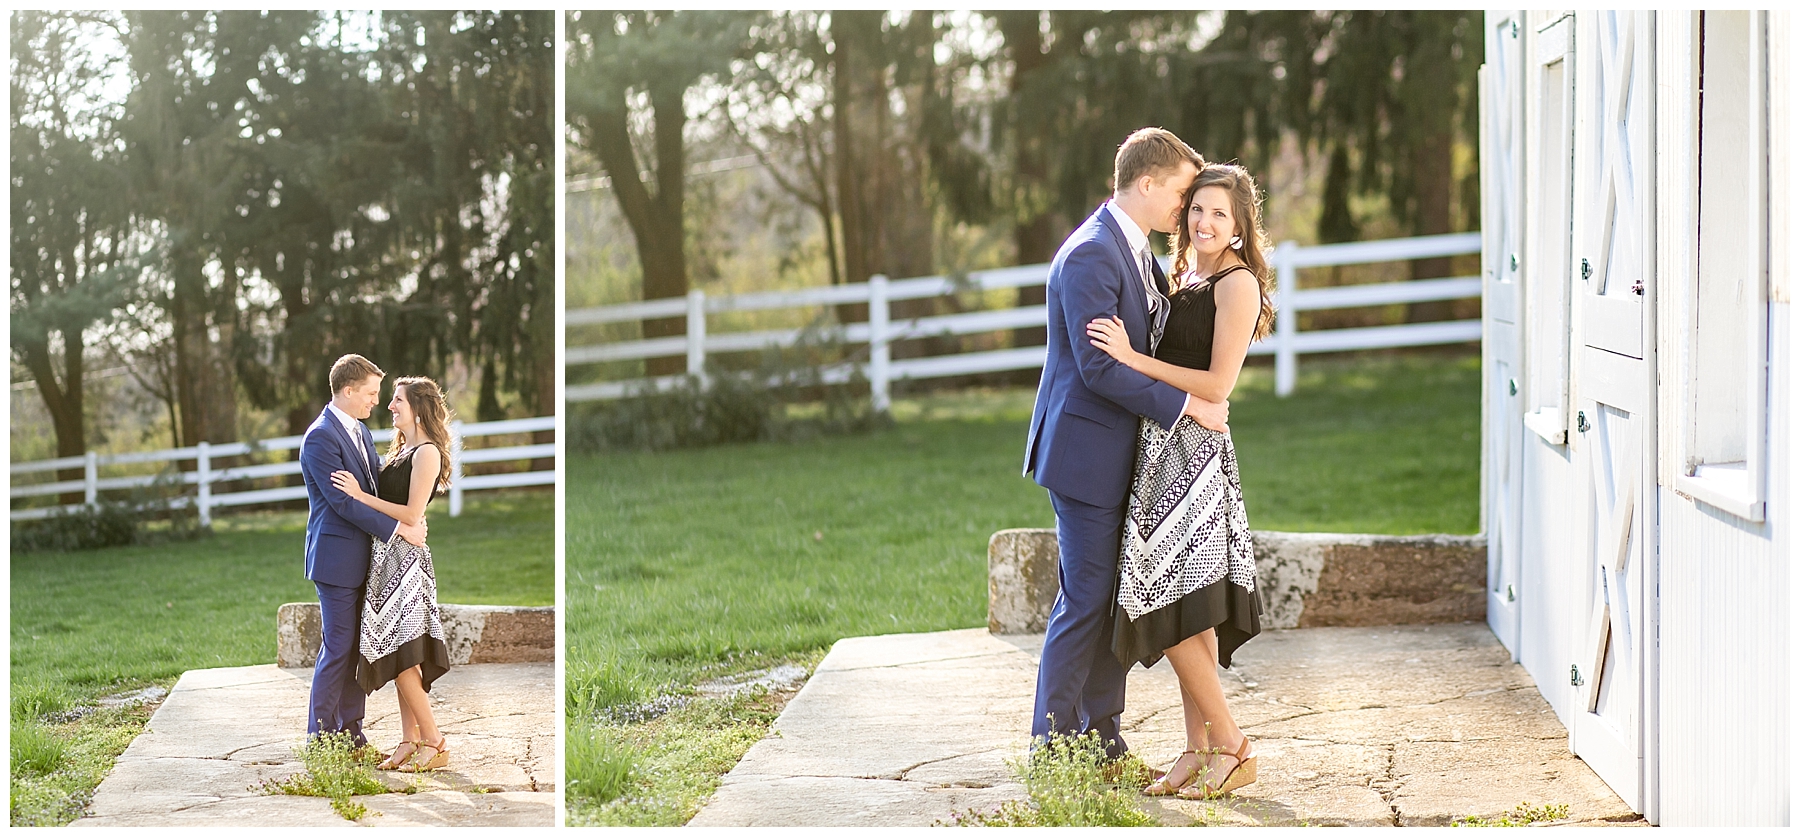 Chelsea Phil Private Estate Engagement Living Radiant Photography photos color_0010.jpg